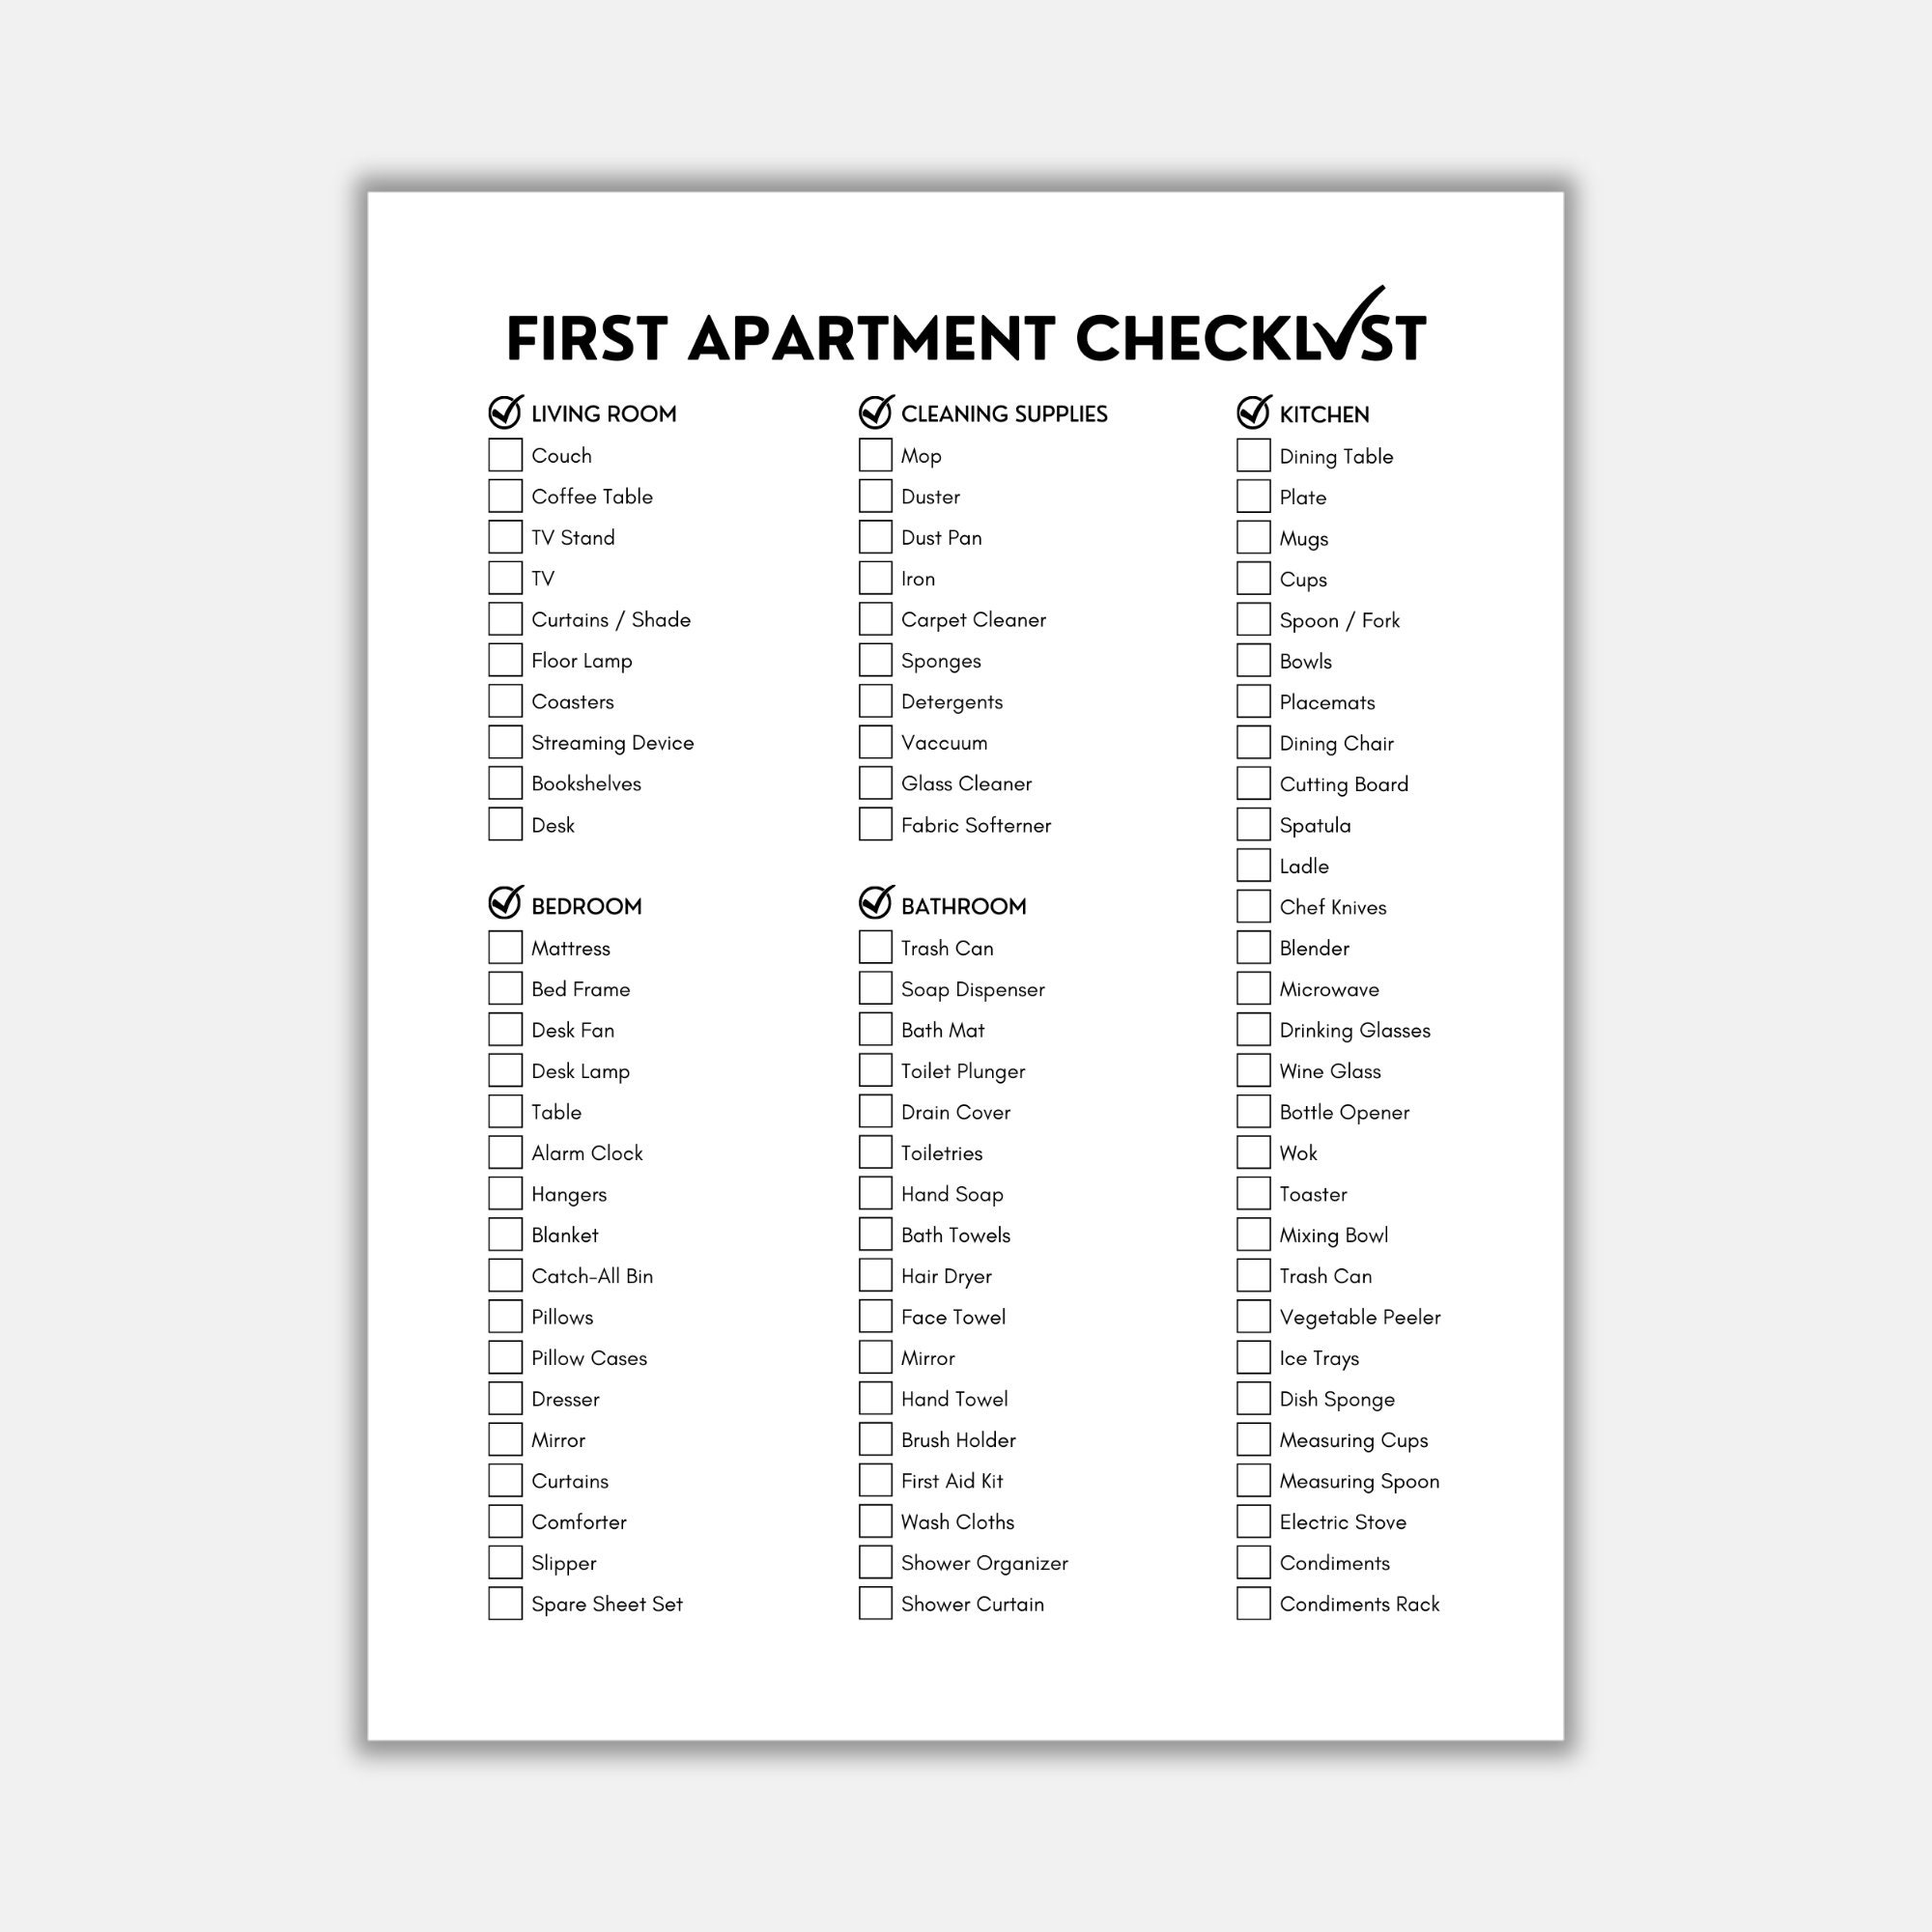 First Apartment Checklist - Essential Items by First Apartment Checklist -  Issuu